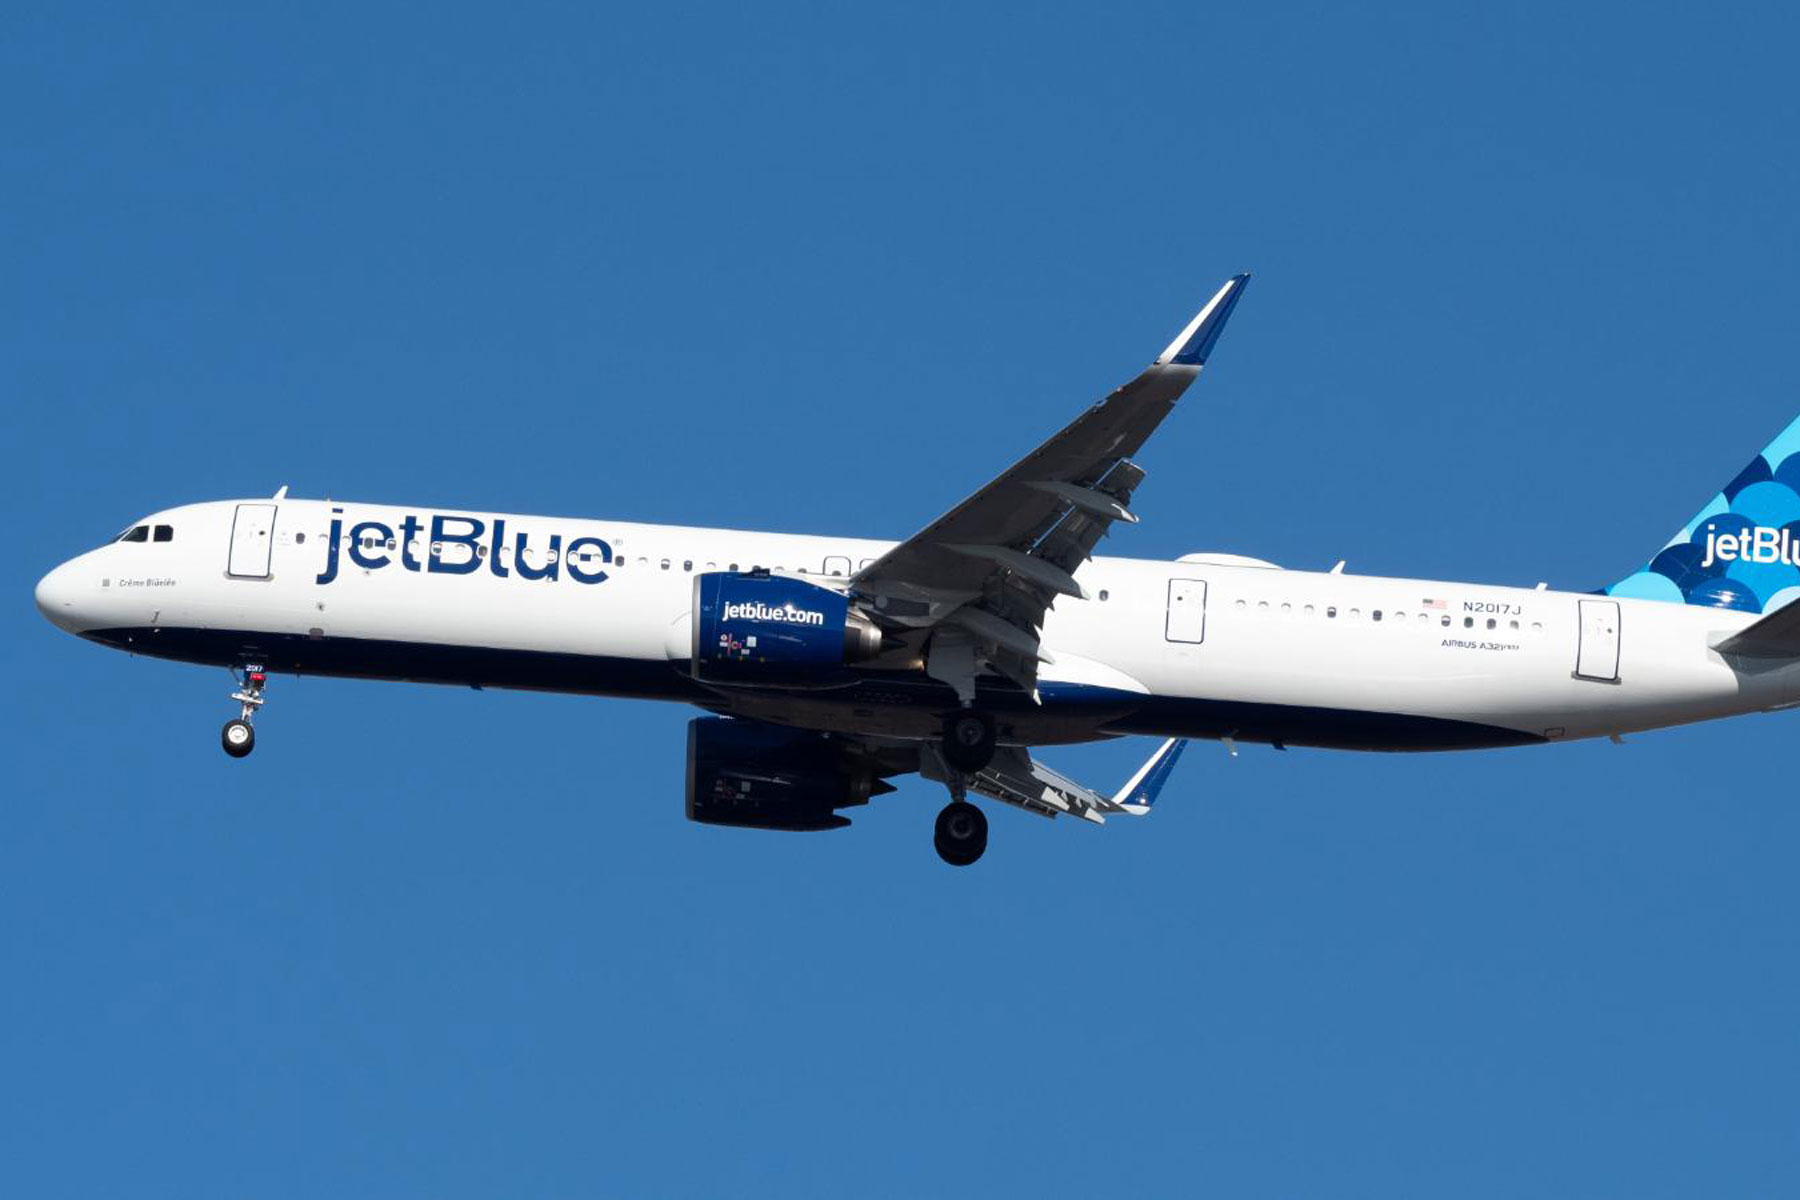 JetBlue ‘Scuffle’ Shows Why Flight Attendants Need Self Defence Training